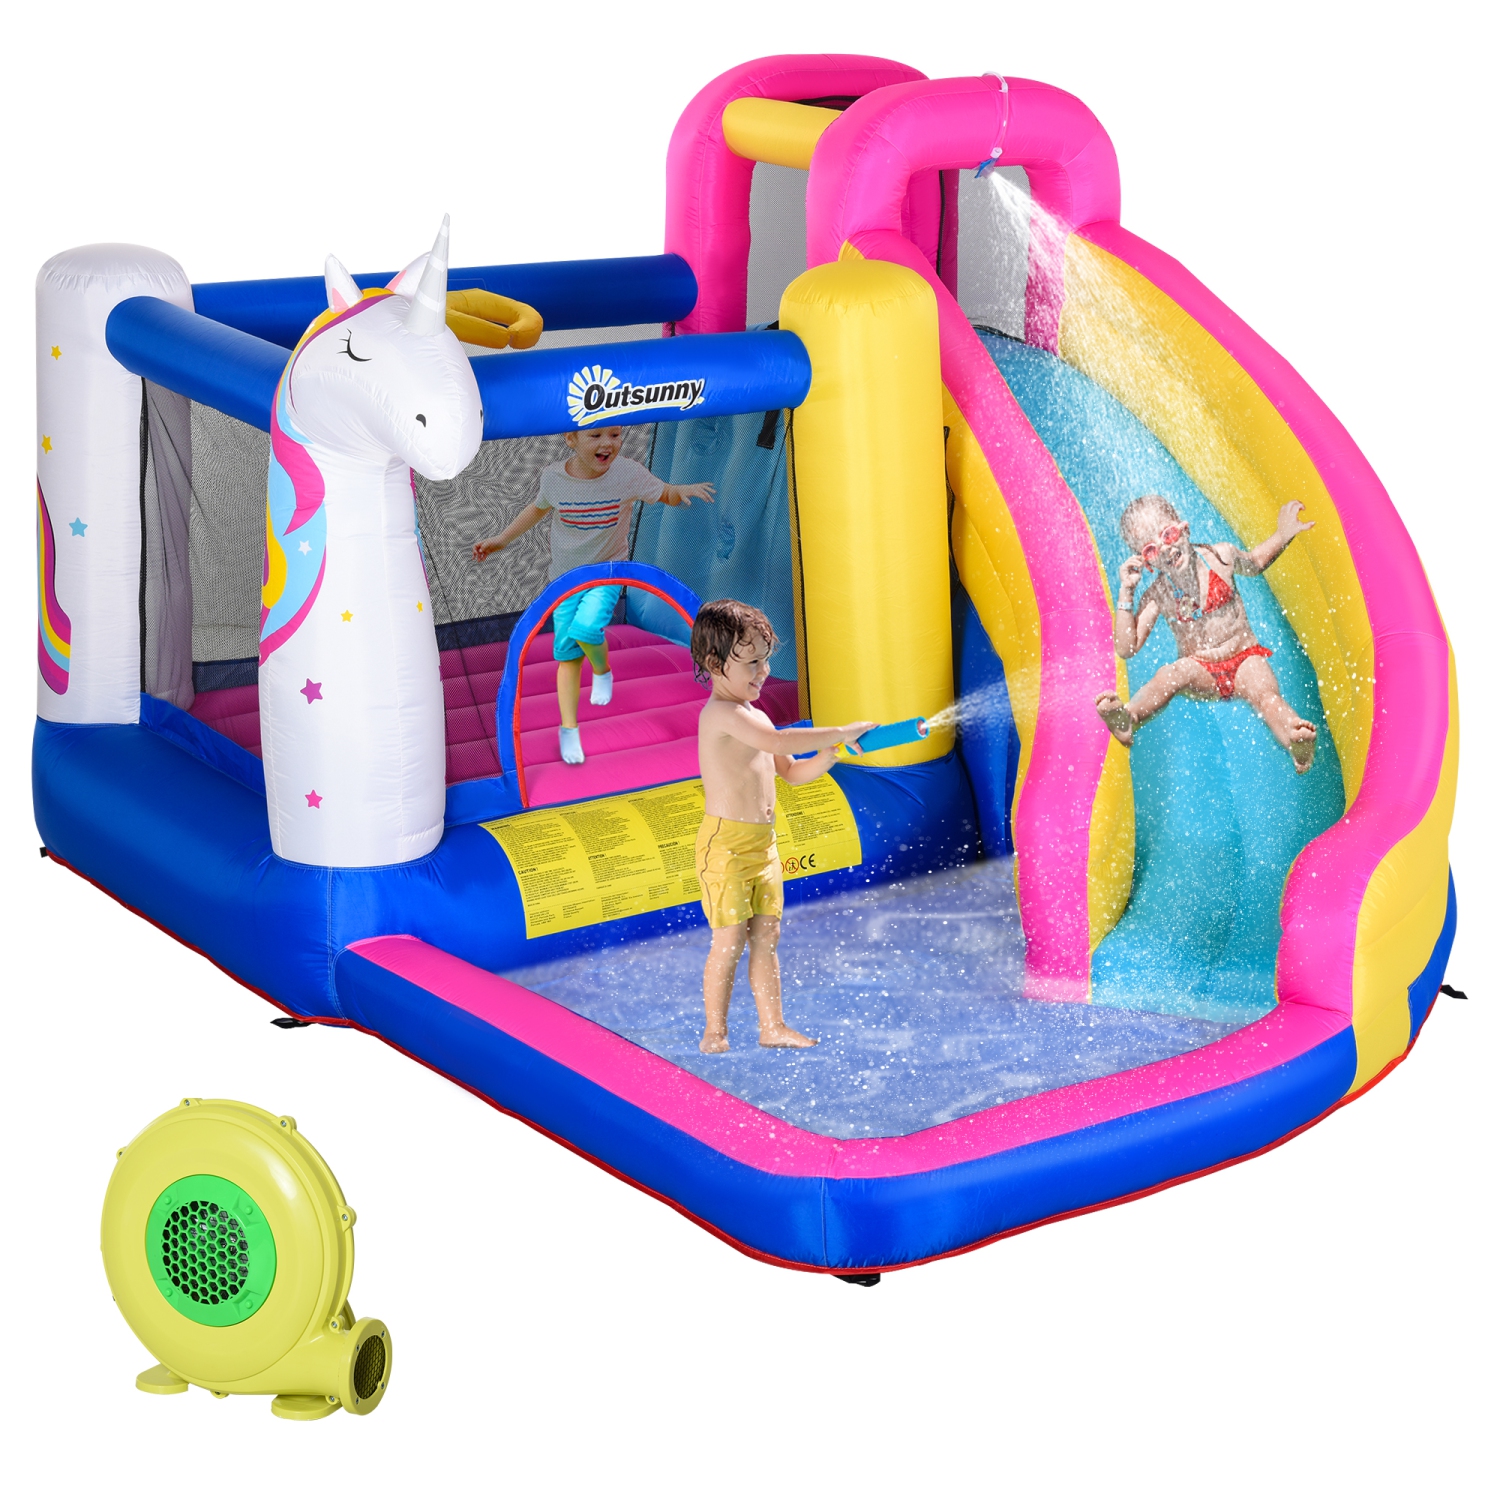 Outsunny Kids Bounce Castle House Inflatable Trampoline Water Slide Pool Climbing Wall 5 in 1 with Inflator for Kids Age 3-12 Summer 12.4' x 10.5' x 6.9' Multi-color